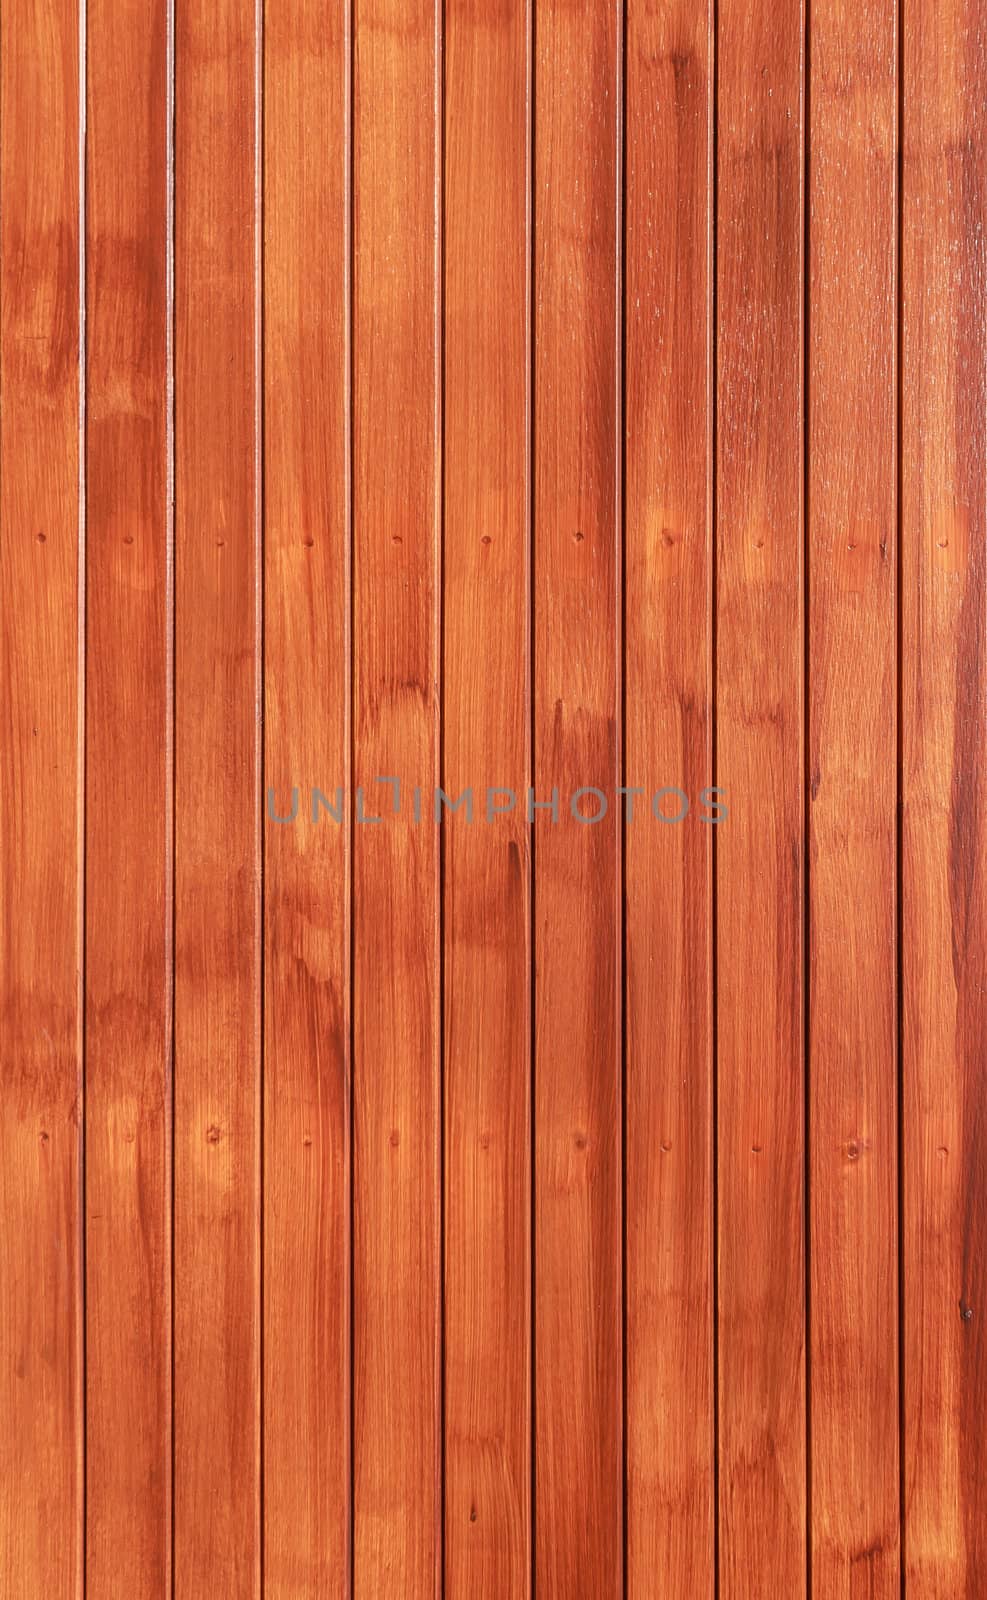 Wood texture background in vertical pattern,  brown color.